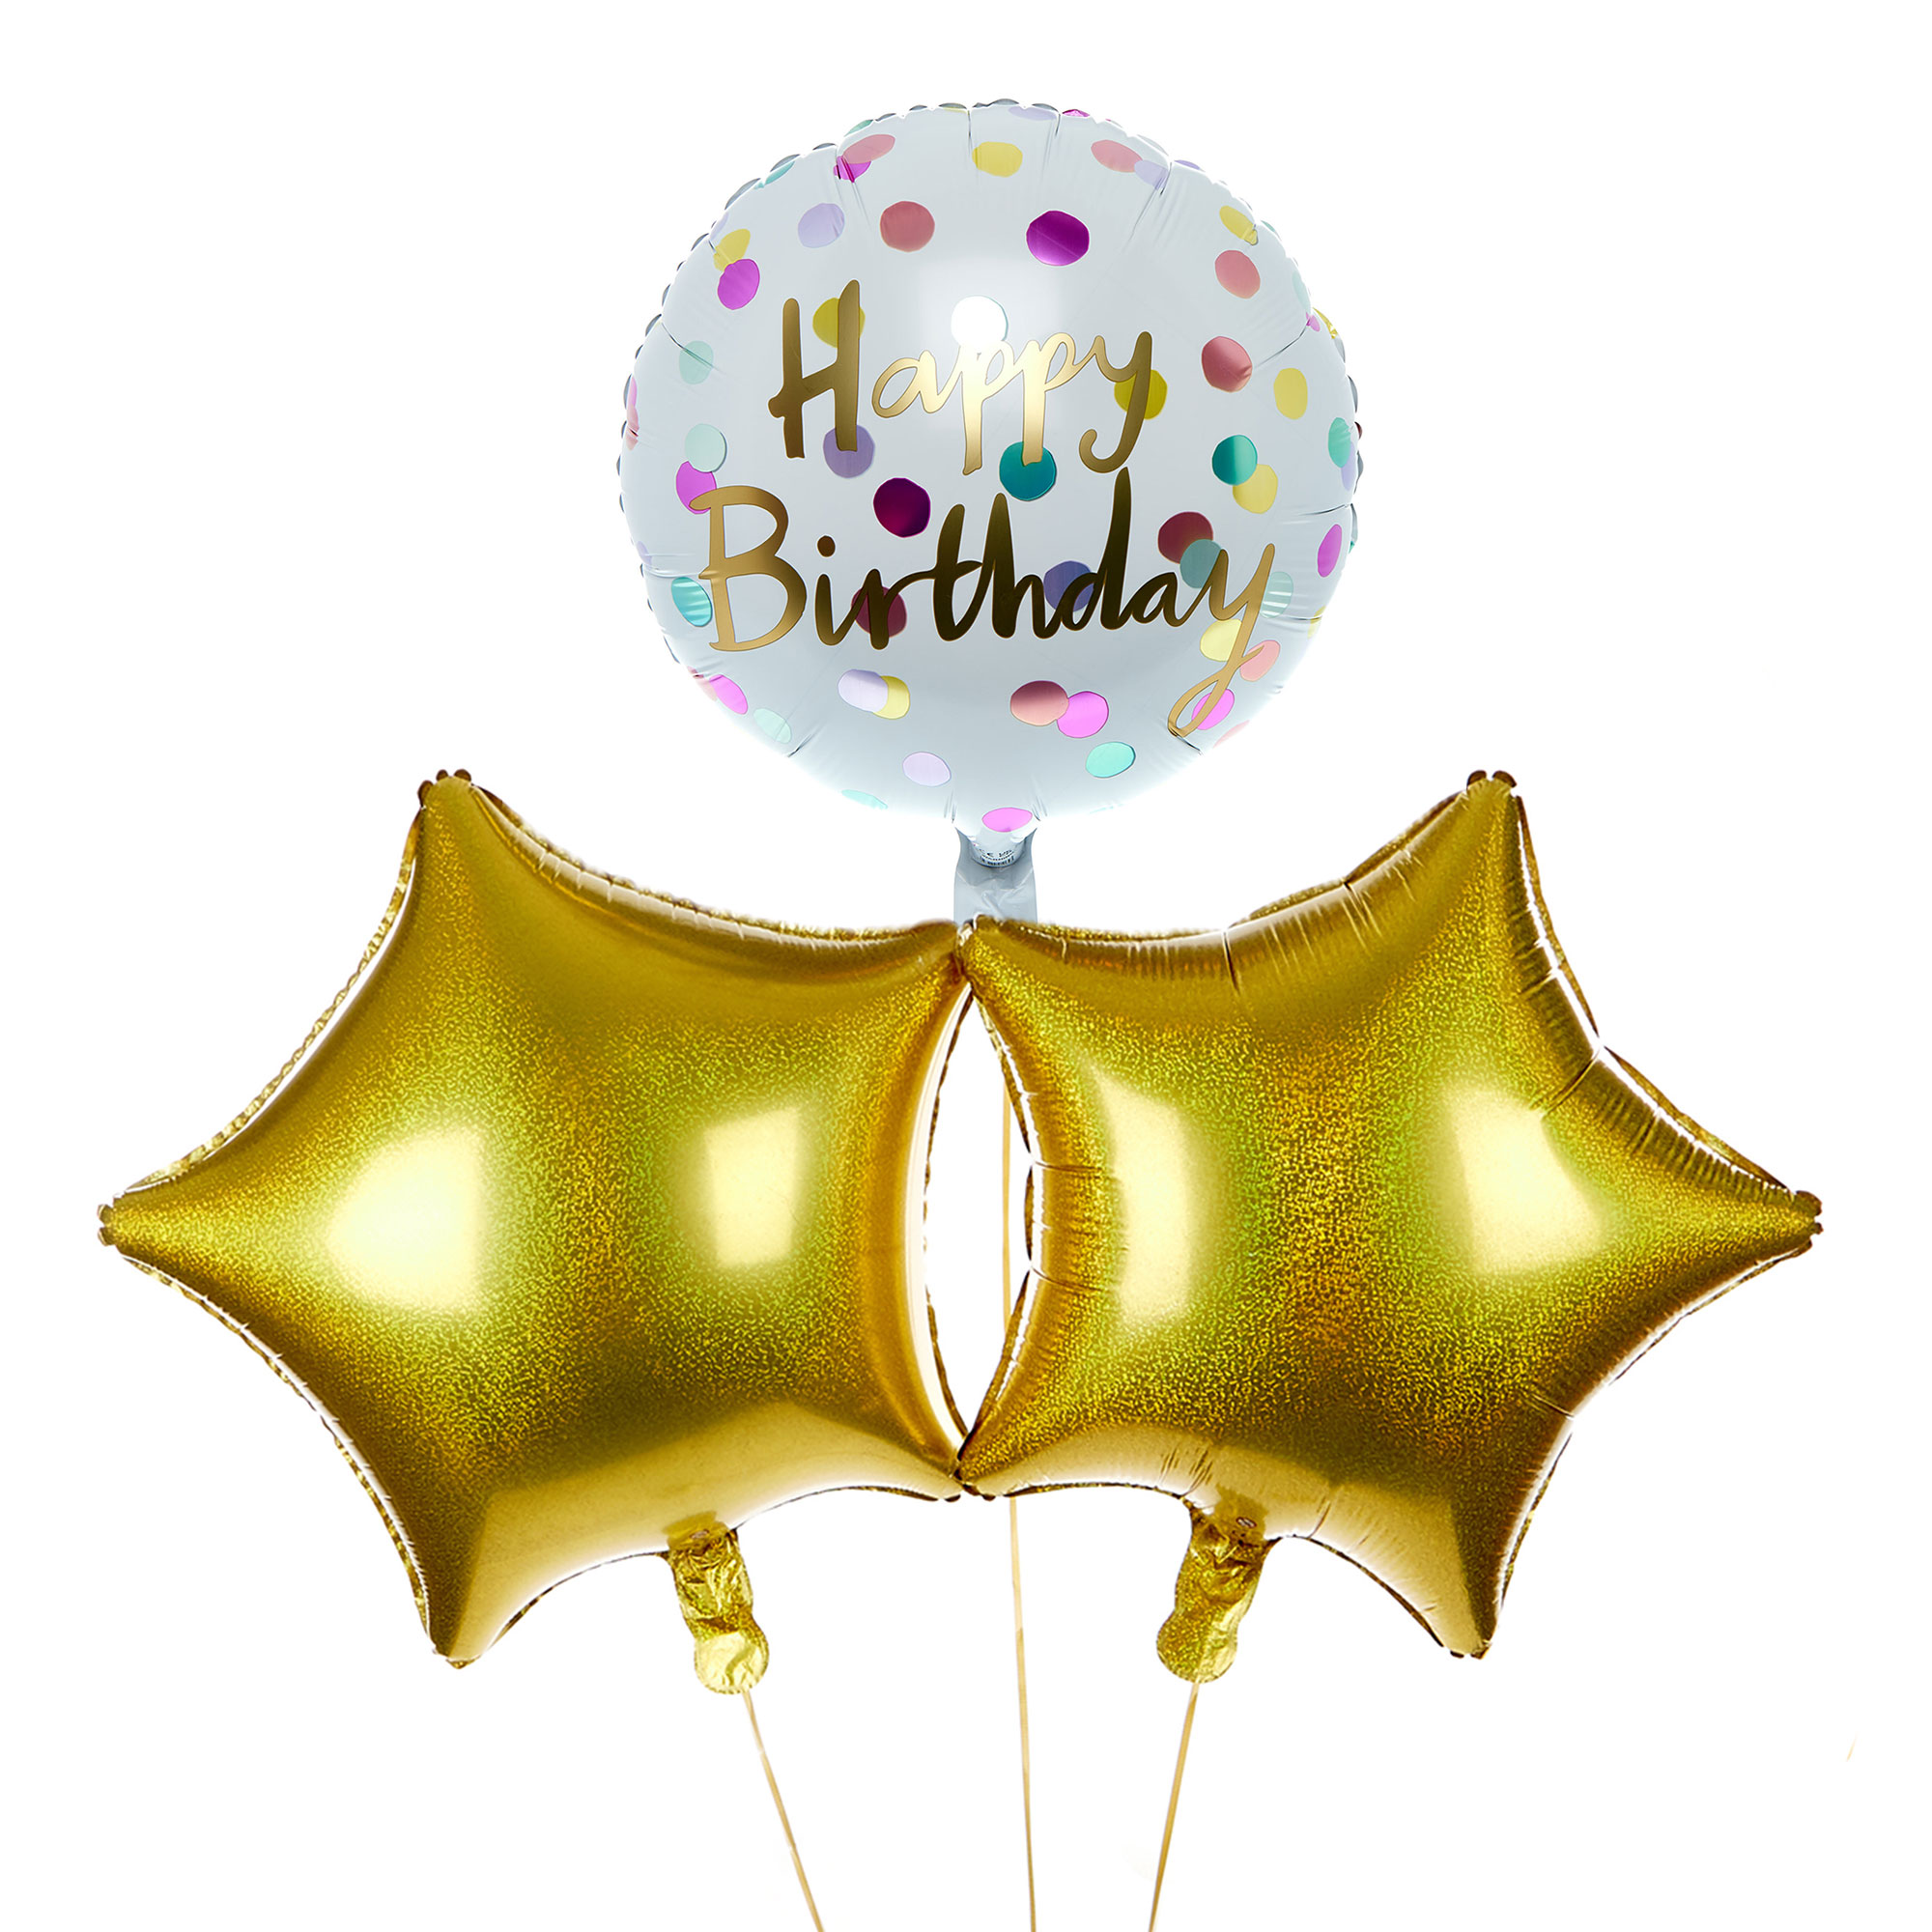 Polka Happy Birthday Balloon Bouquet - DELIVERED INFLATED!